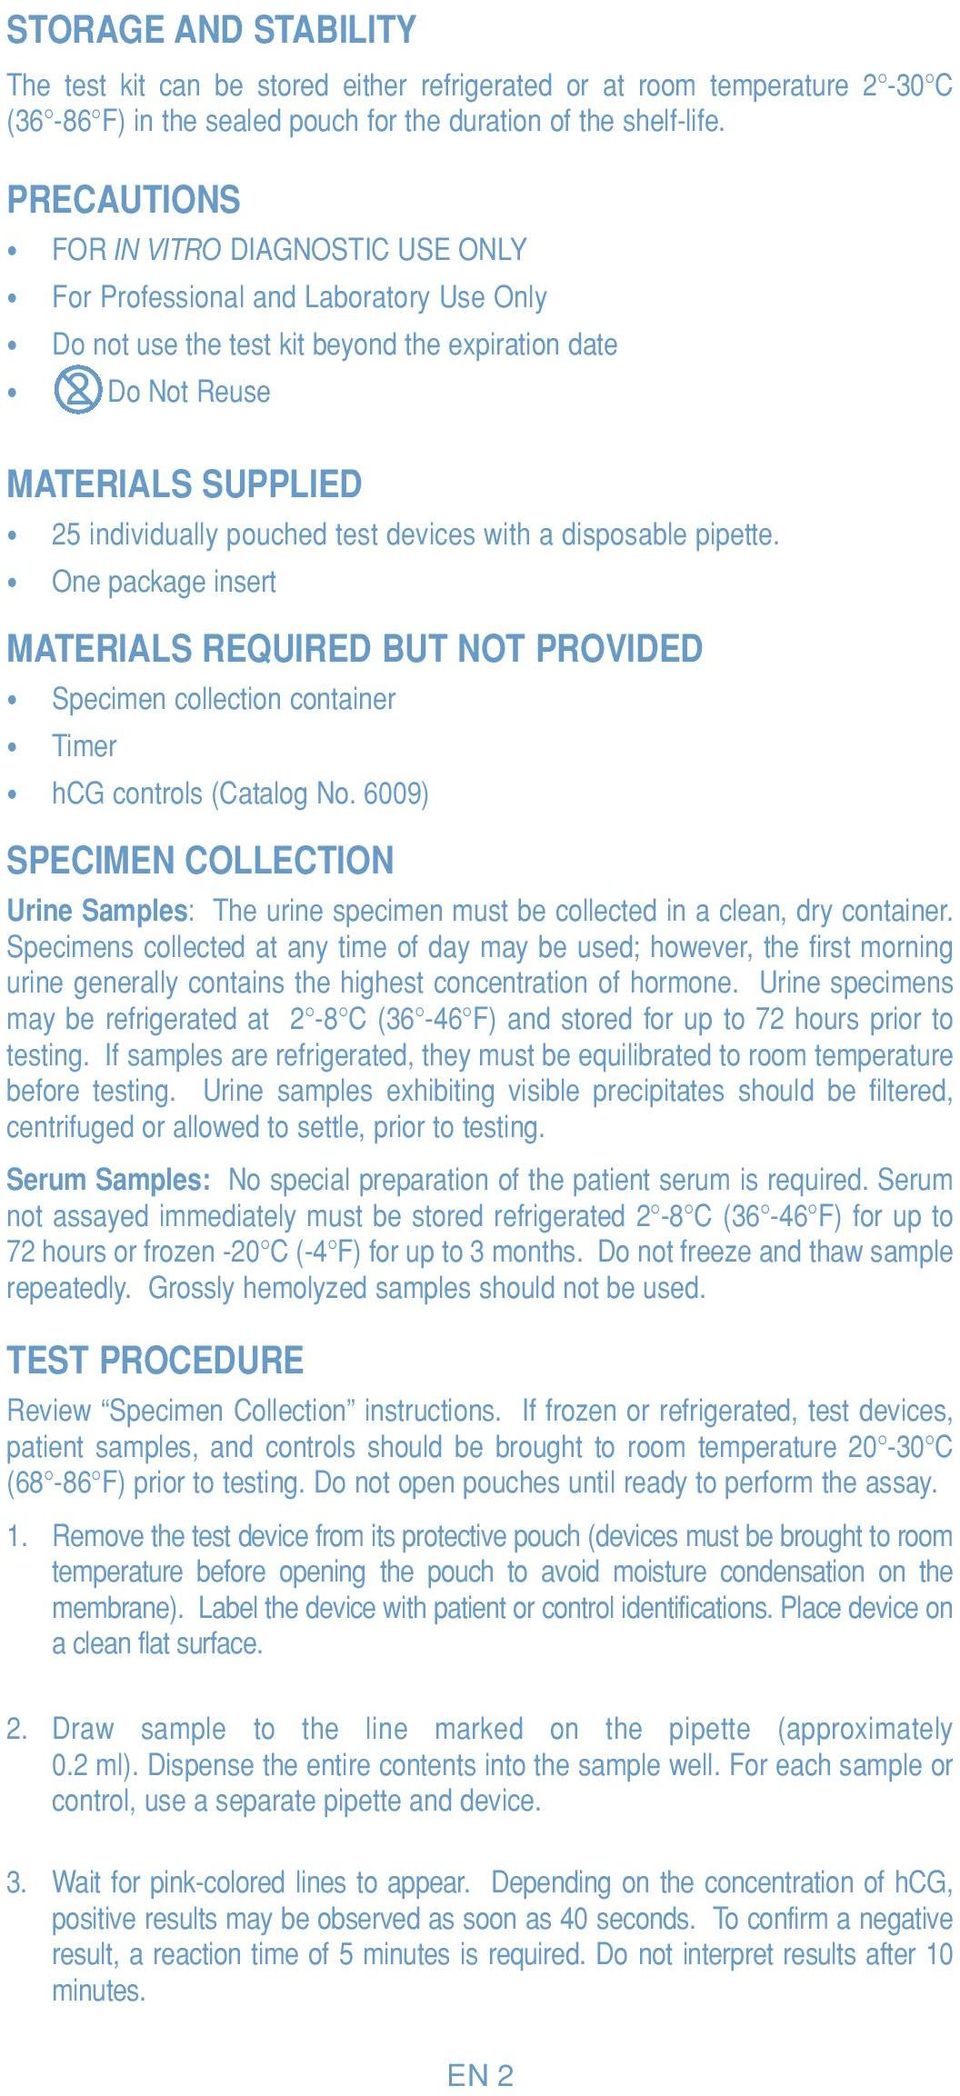 devices with a disposable pipette. One package insert MAERIALS REQUIRED BU NO PROVIDED Specimen collection container imer hg controls (atalog No.